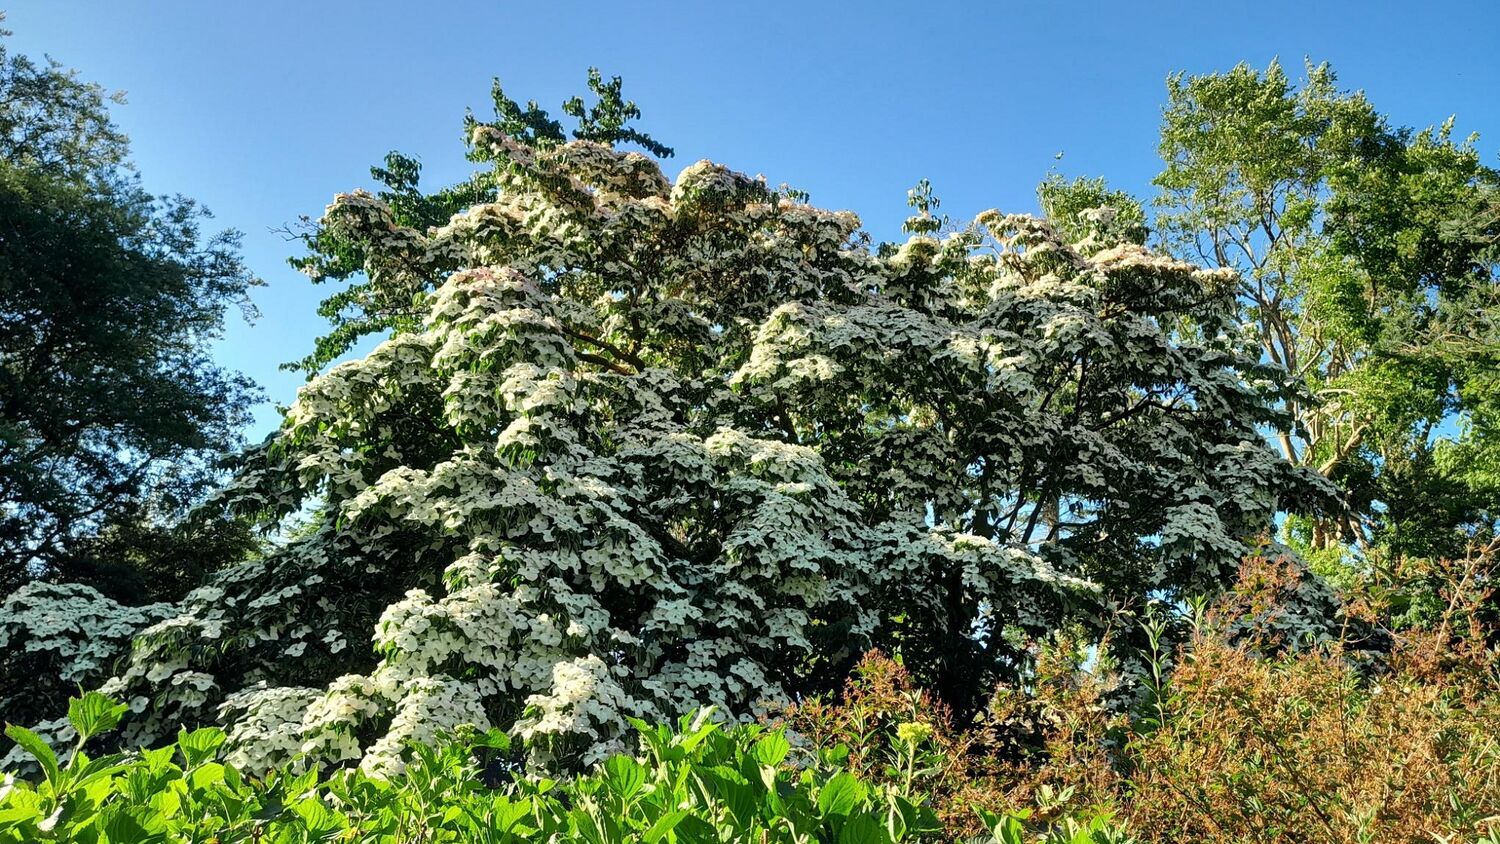 A large tree looms over a collection of shrubs in the foreground. The tree is covered in large white flowers, which especially stand out against the deep blue sky.